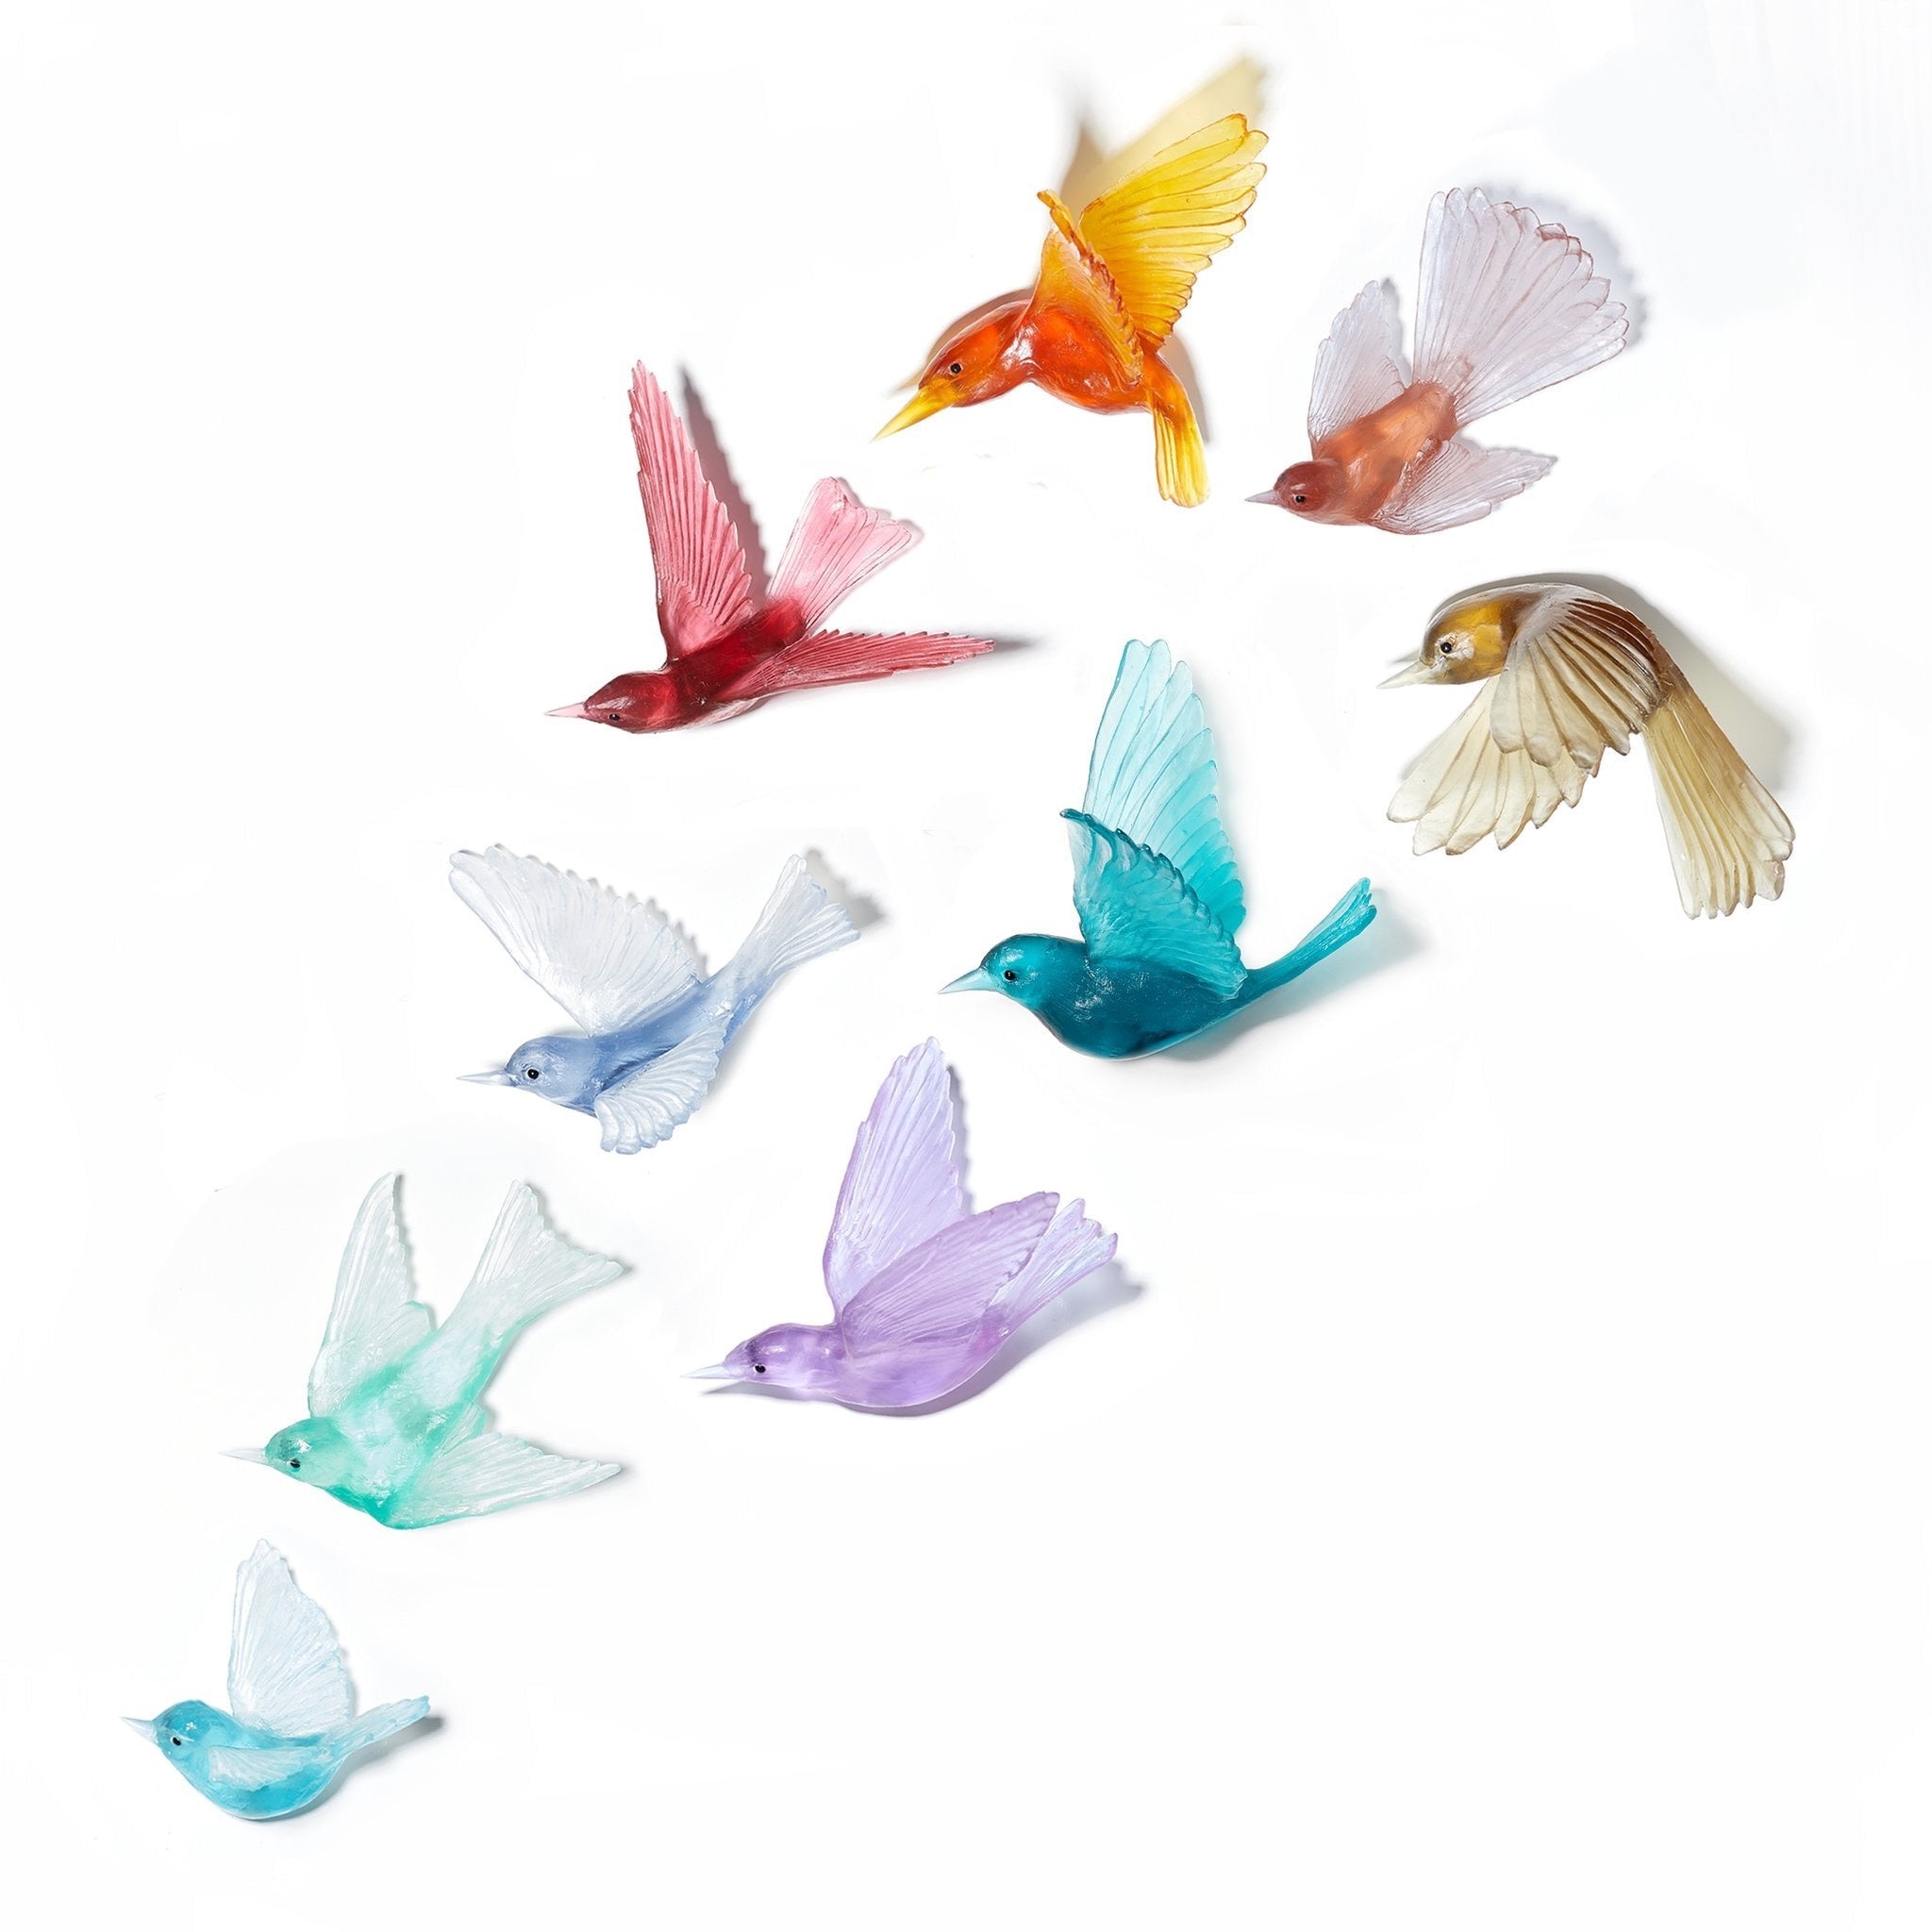 Glass birds in multiple bright colours